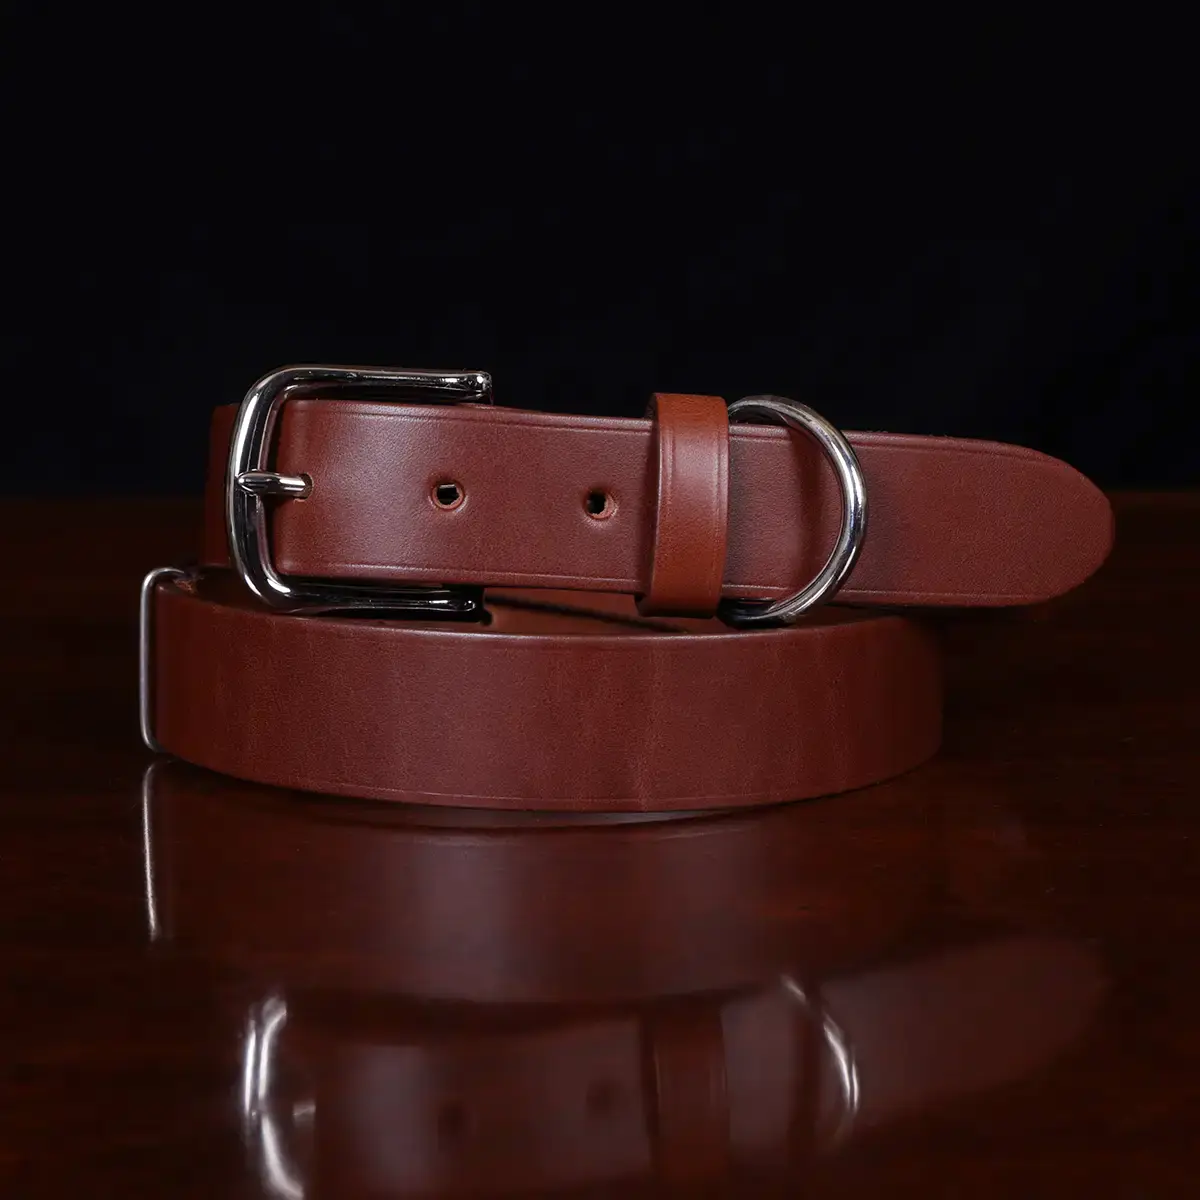 Colonel Littleton No. 1 Leather Belt - Italian Bridle Leather - Brown Leather with Nickel, Large. Adjusts to Fit Sizes 34 - 42